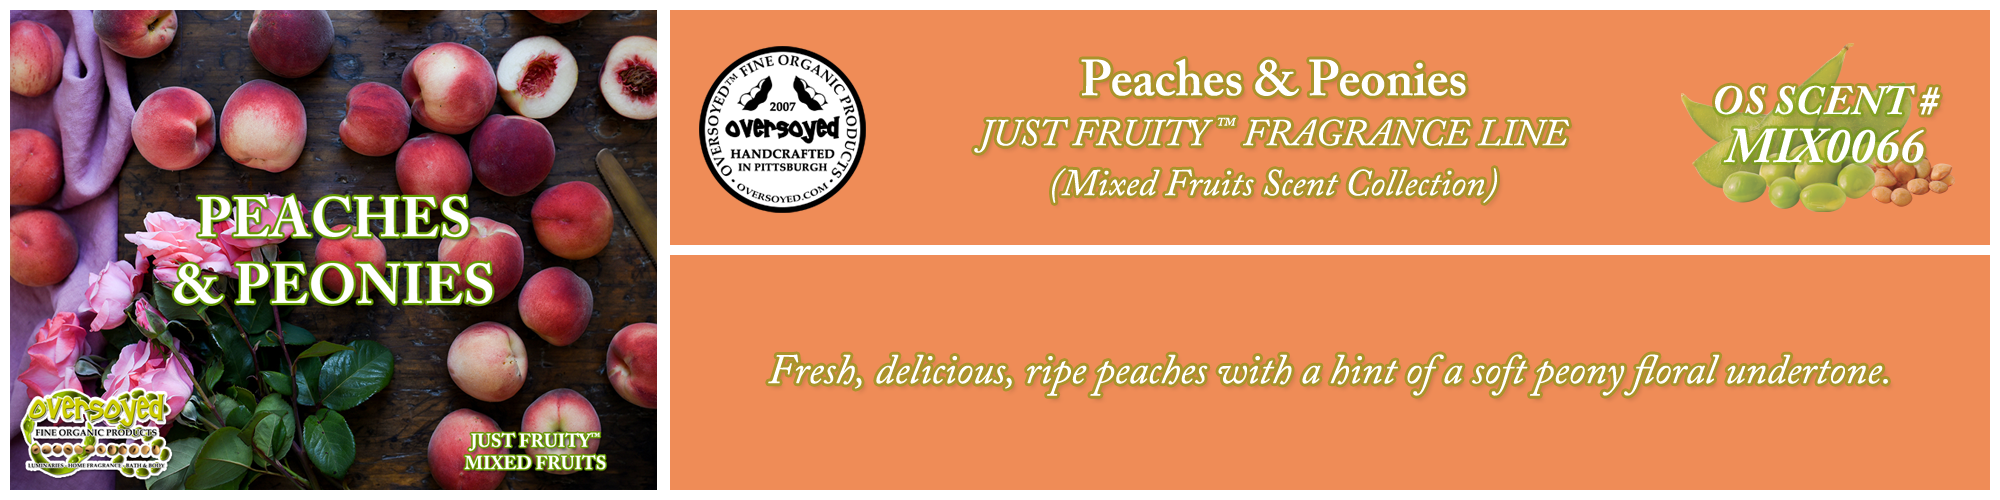 Peaches & Peonies Handcrafted Products Collection